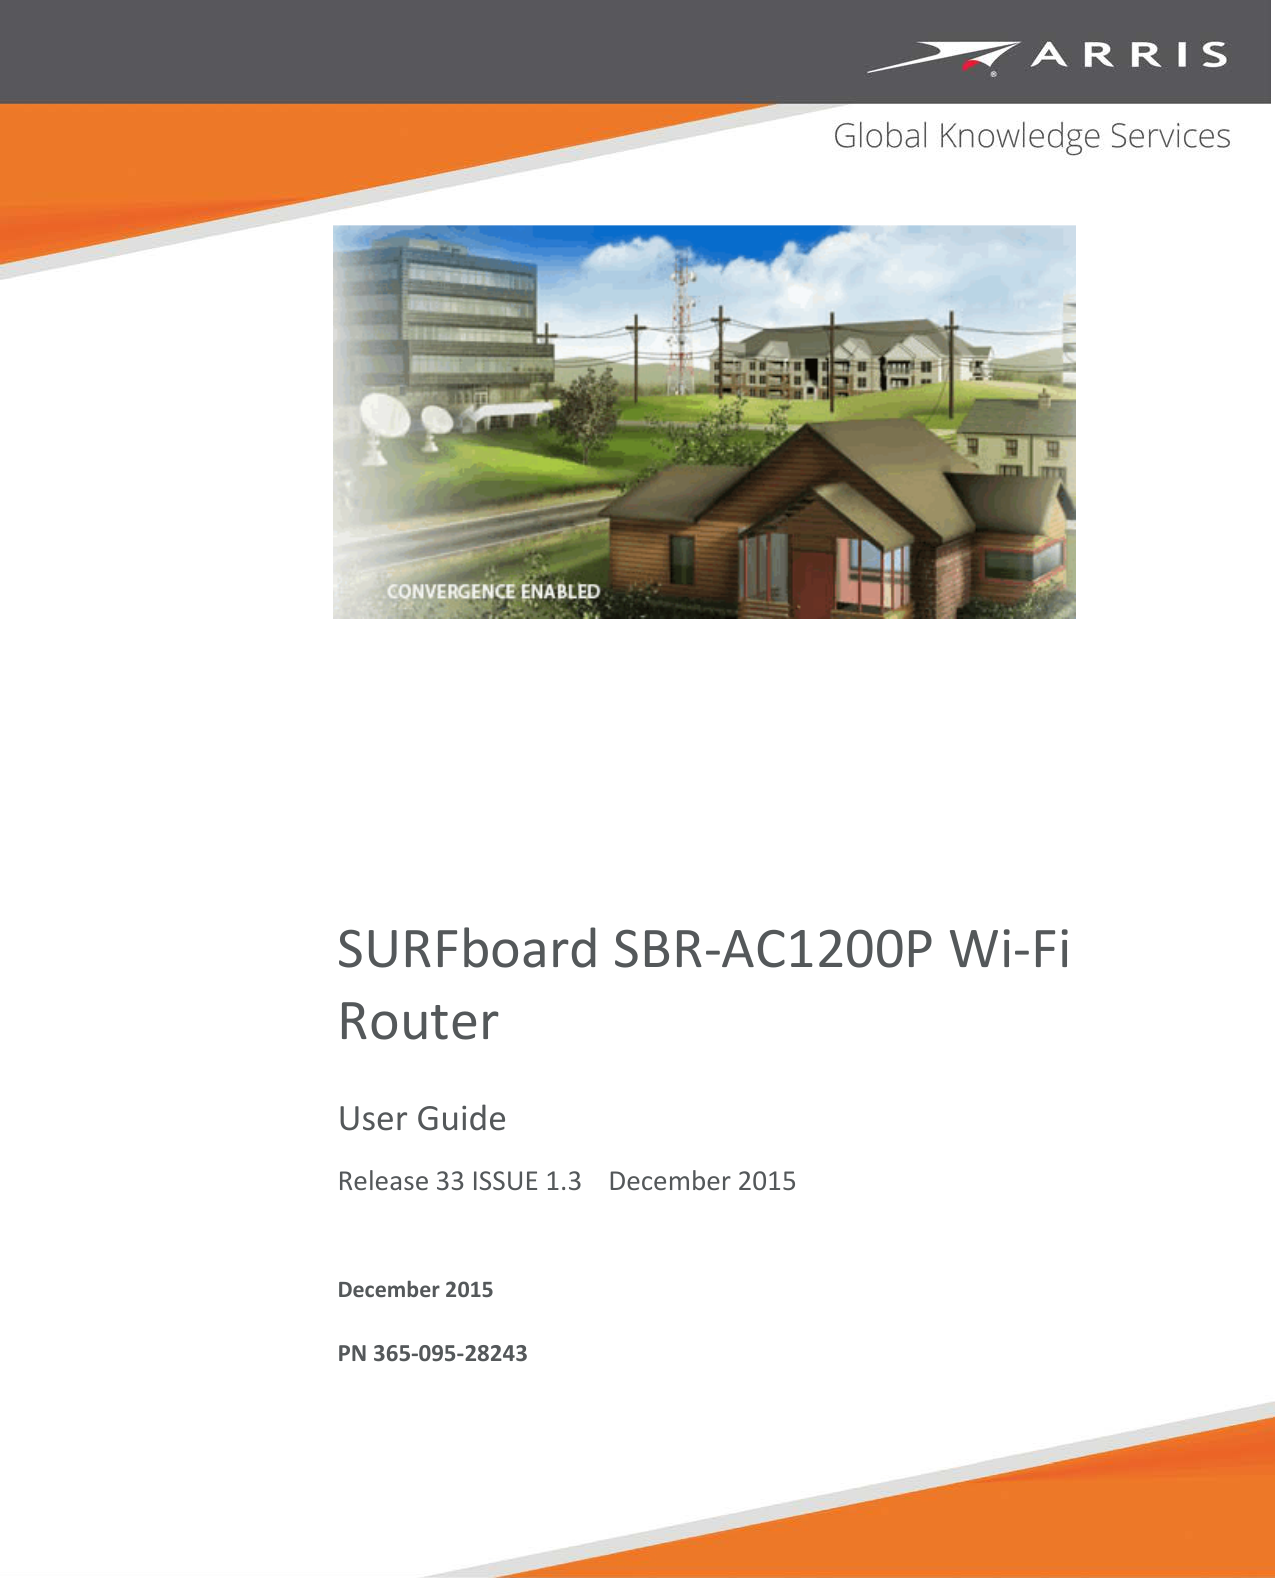   SURFboard SBR-AC1200P Wi-Fi Router User Guide PN 365-095-28243 Release 33 ISSUE 1.3    December 2015  December 2015  